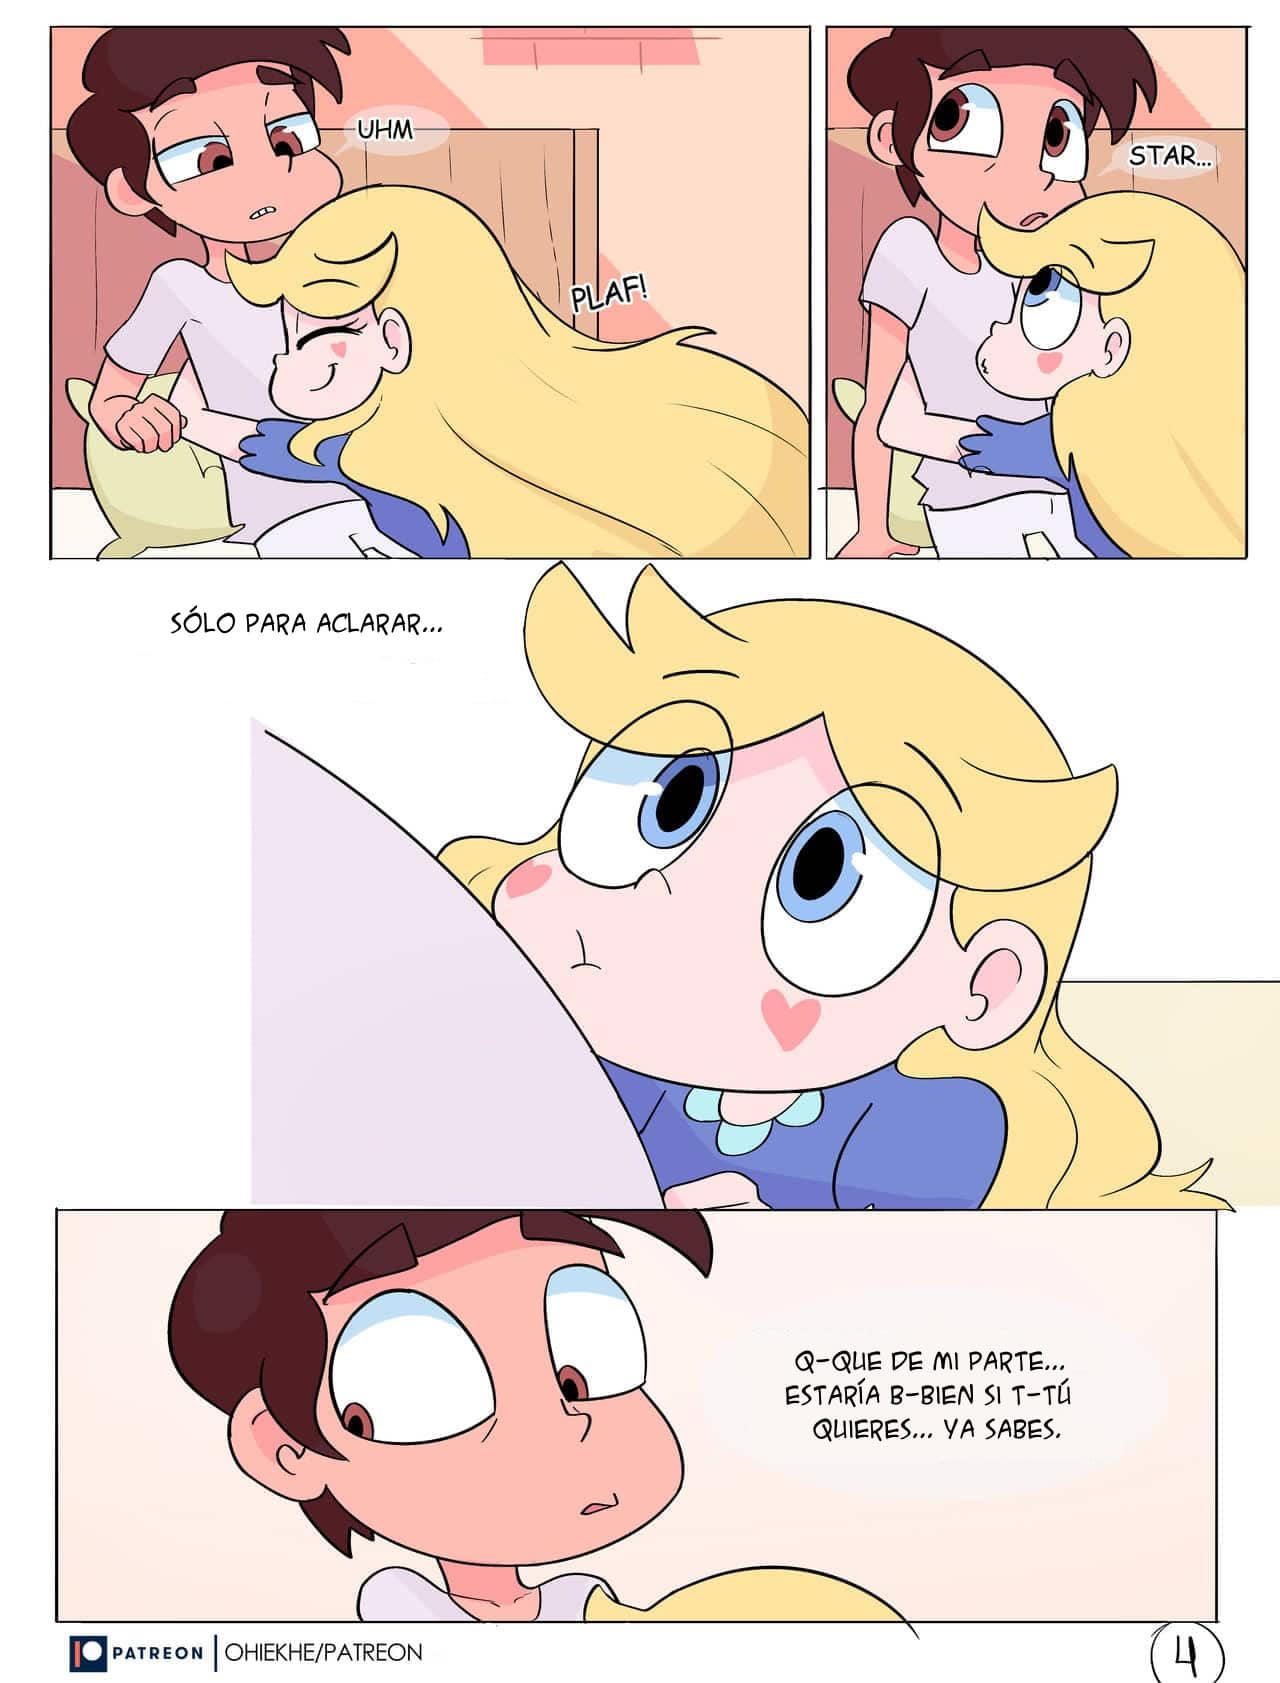 Time Alone – Star vs the Forces of Evil - 4